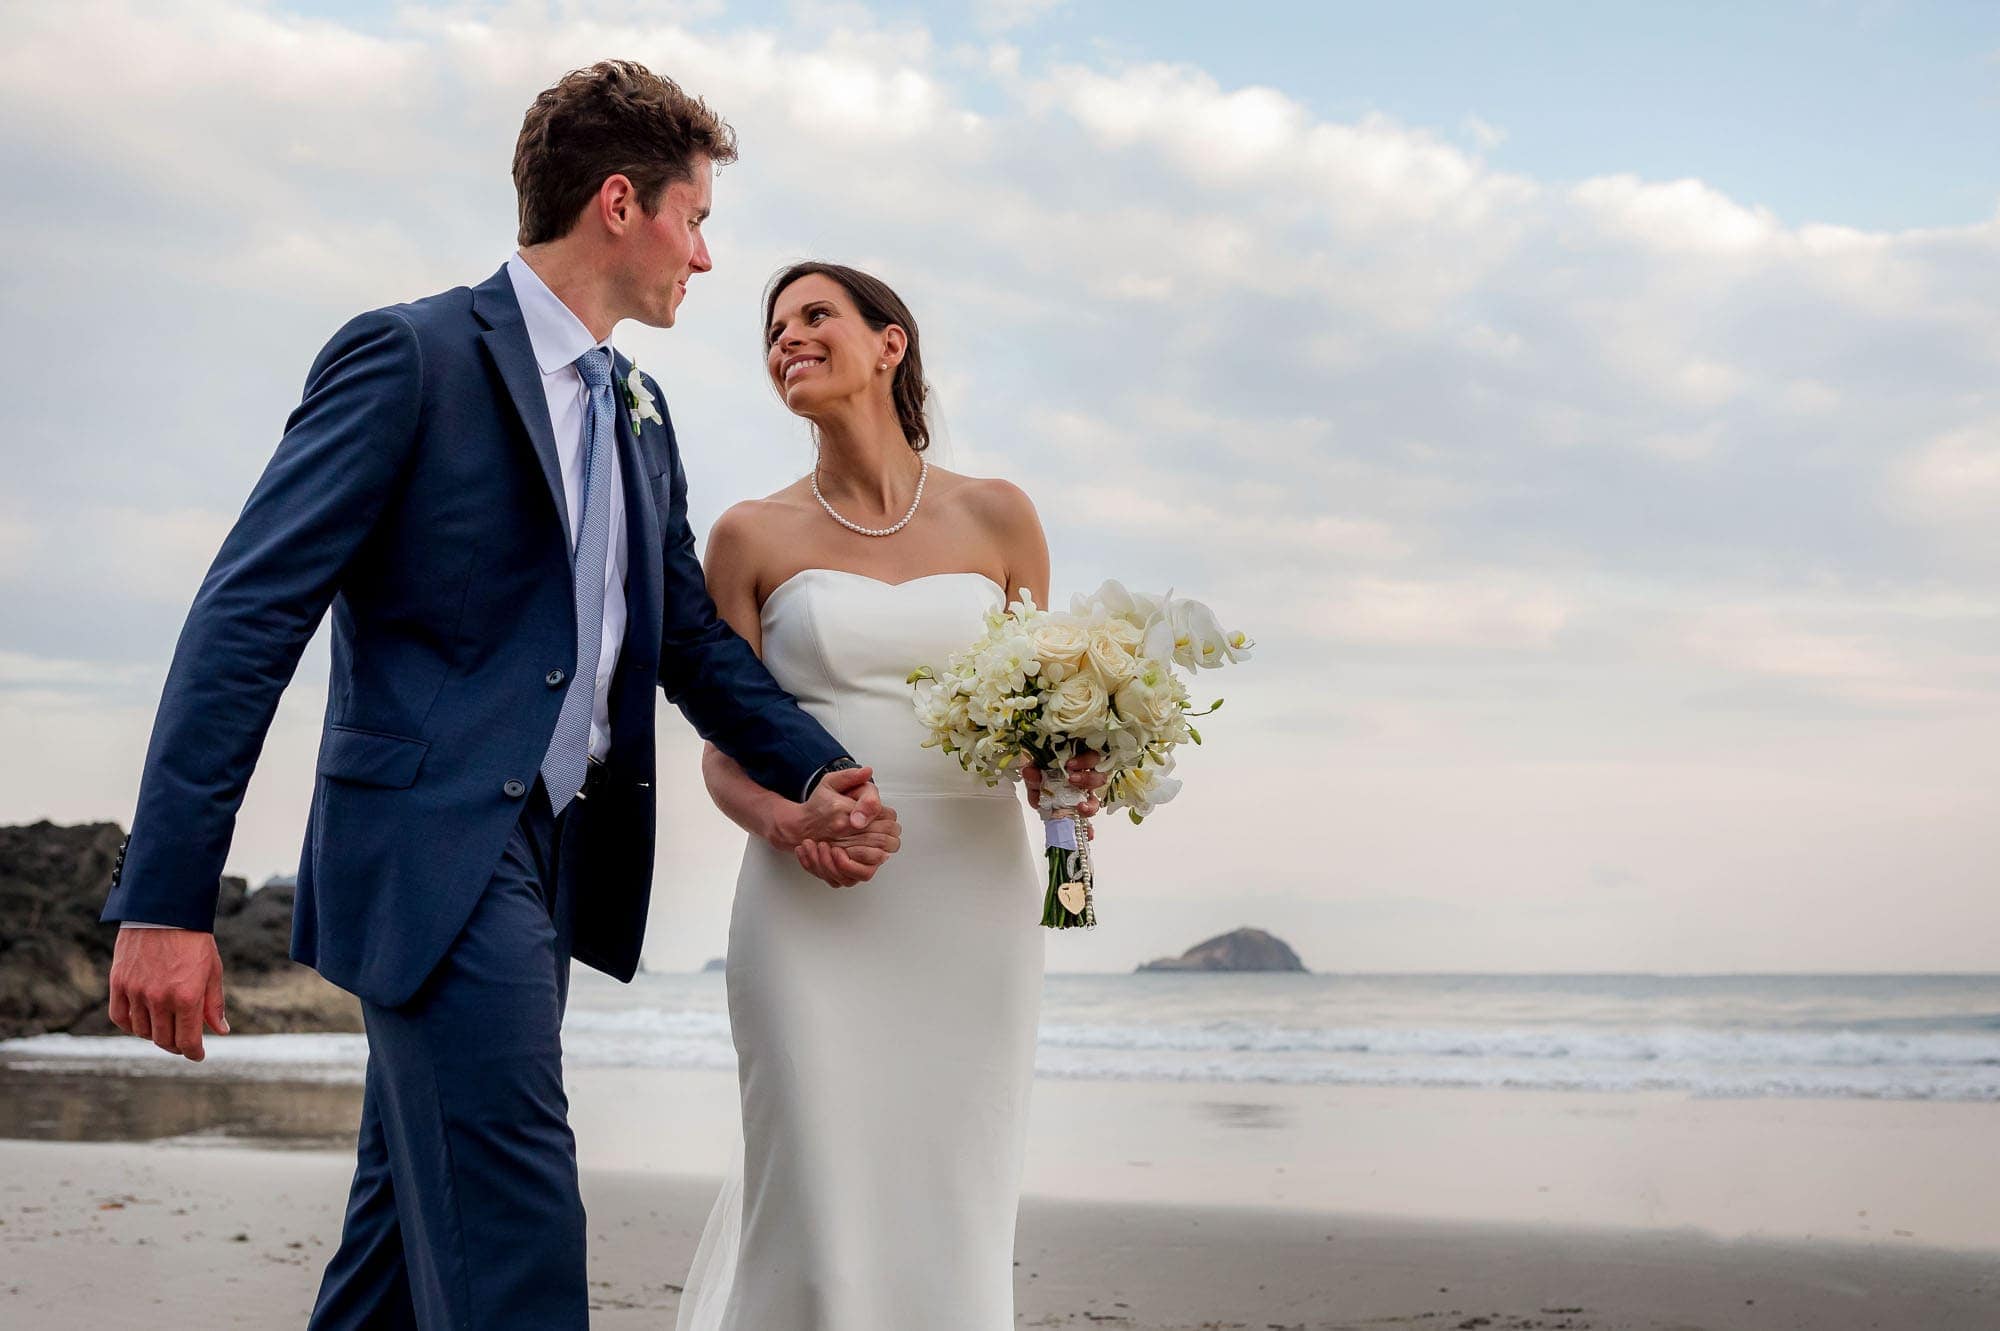 Couple on the beach, getting married in Costa Rica